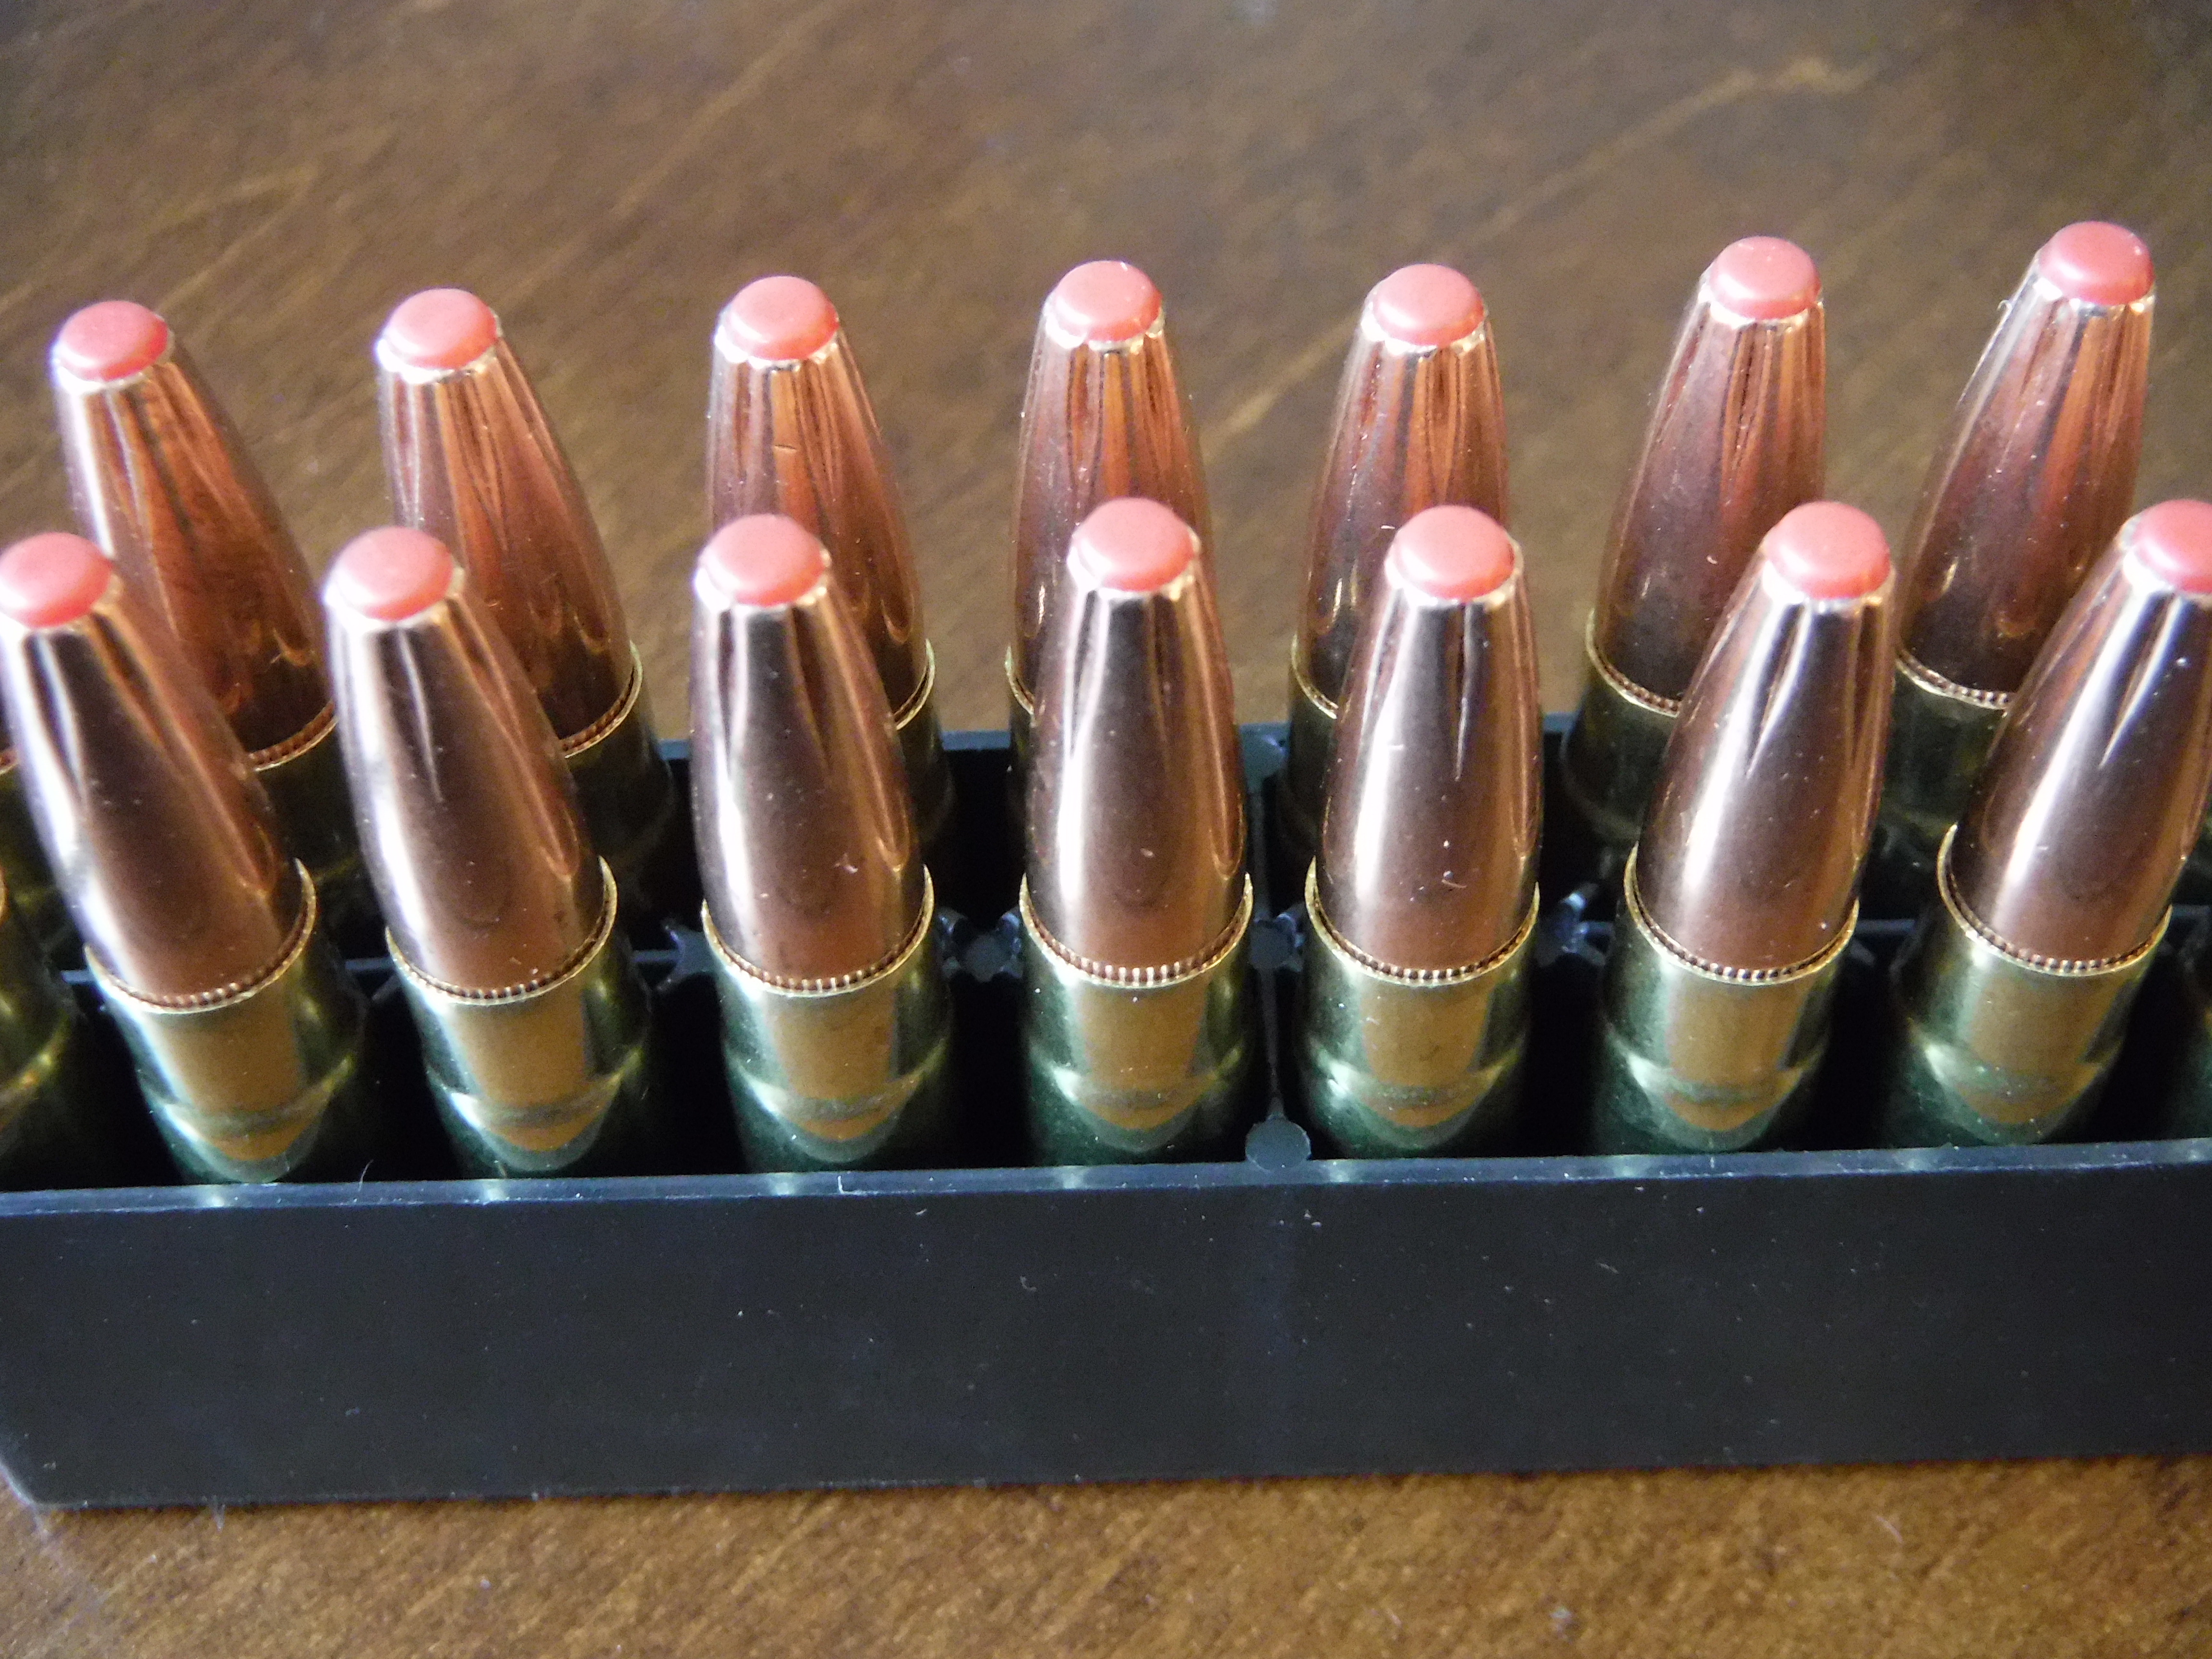 best .300 blackout subsonic ammo